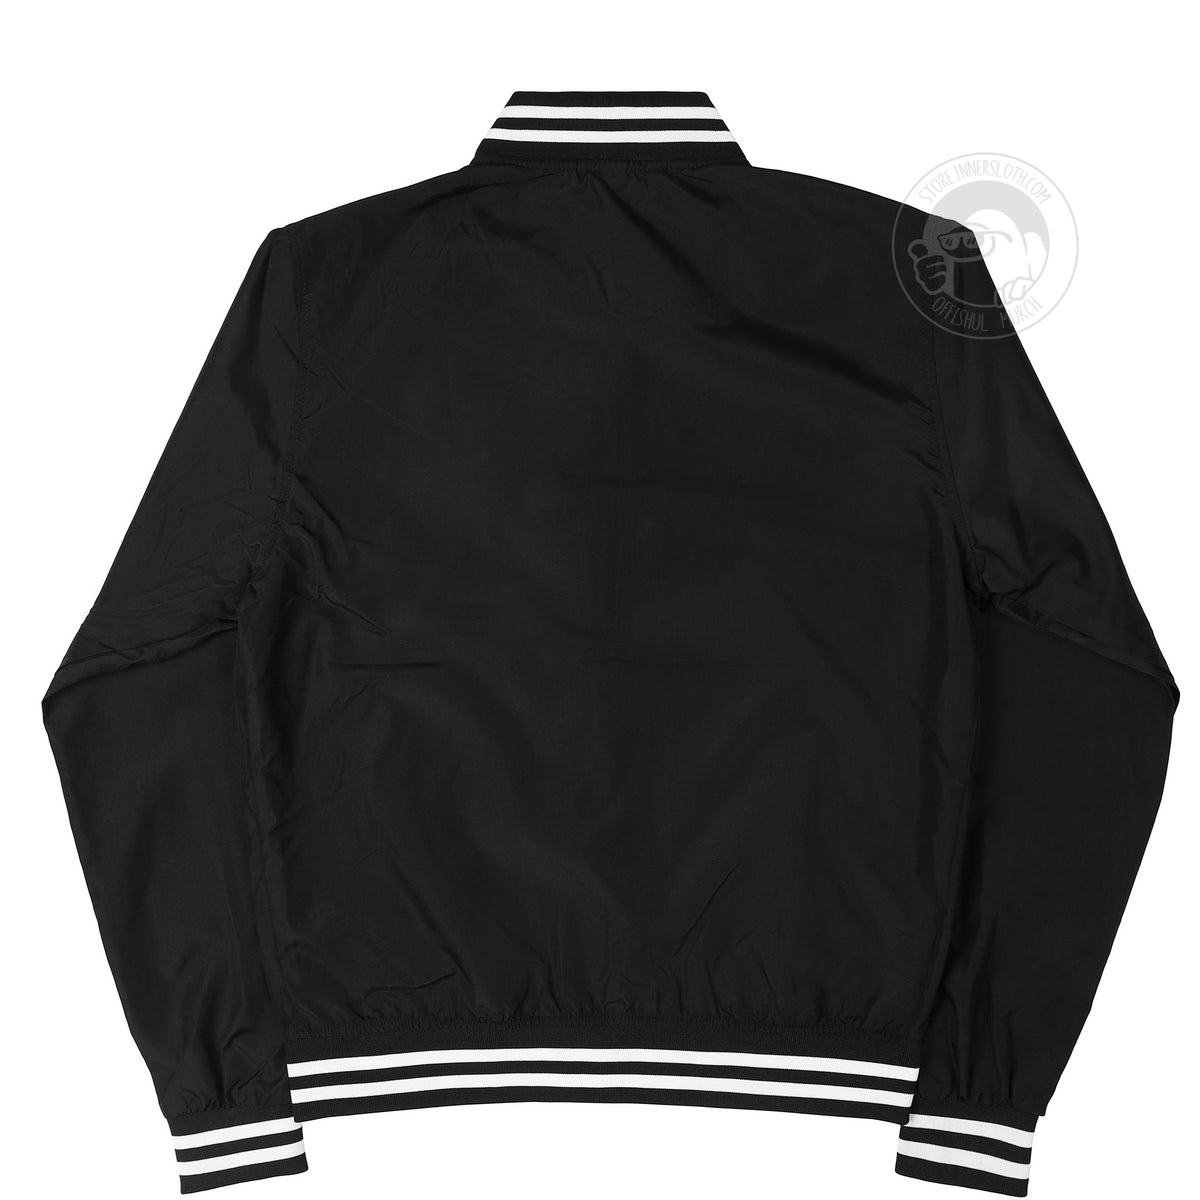 A photograph of the back of the black bomber jacket.